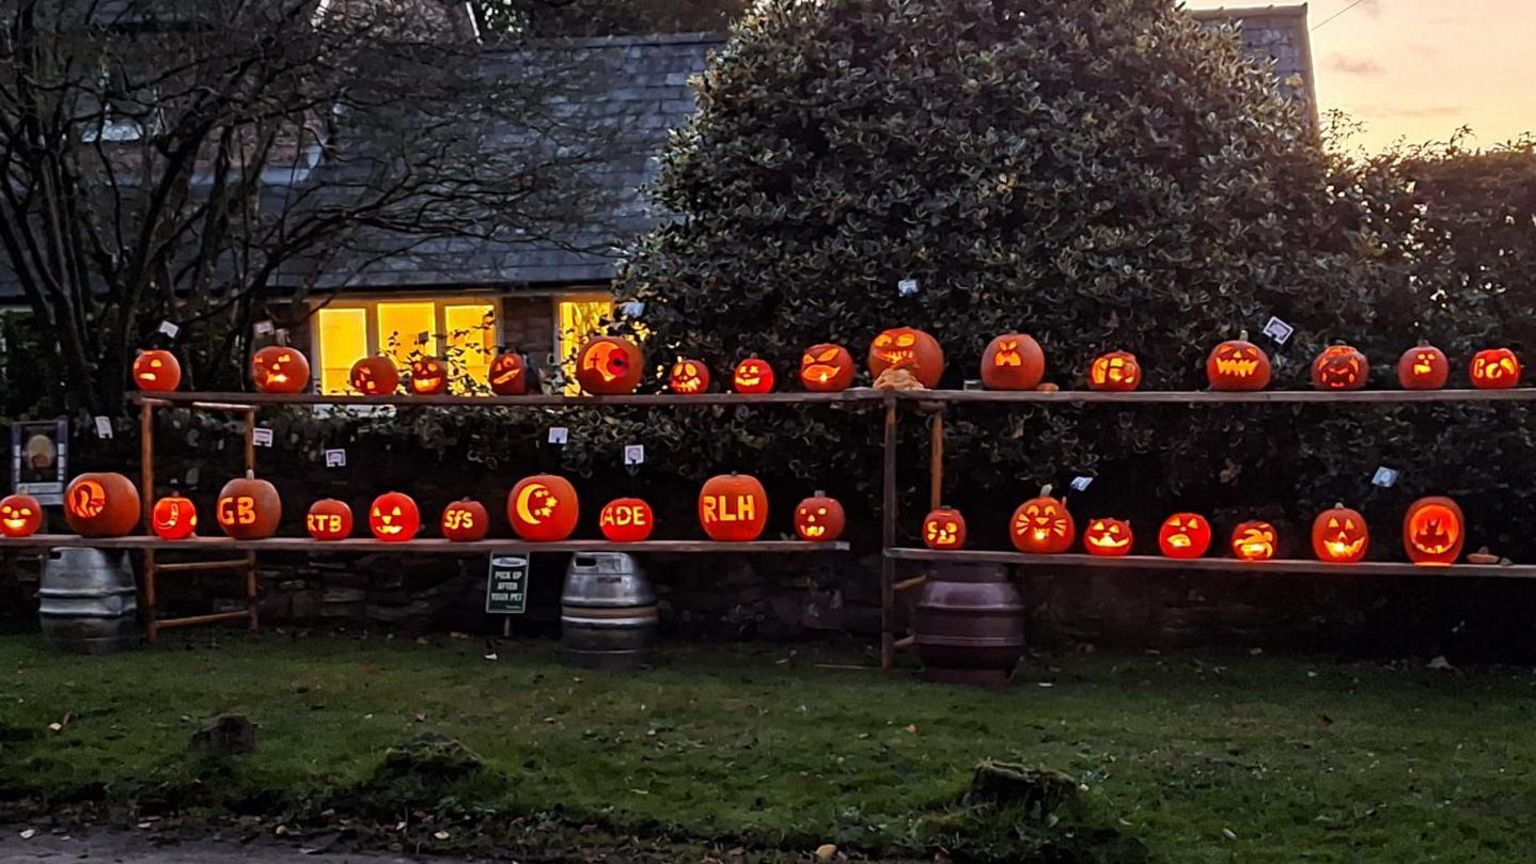 Many carved pumpkins are lit up and displayed 